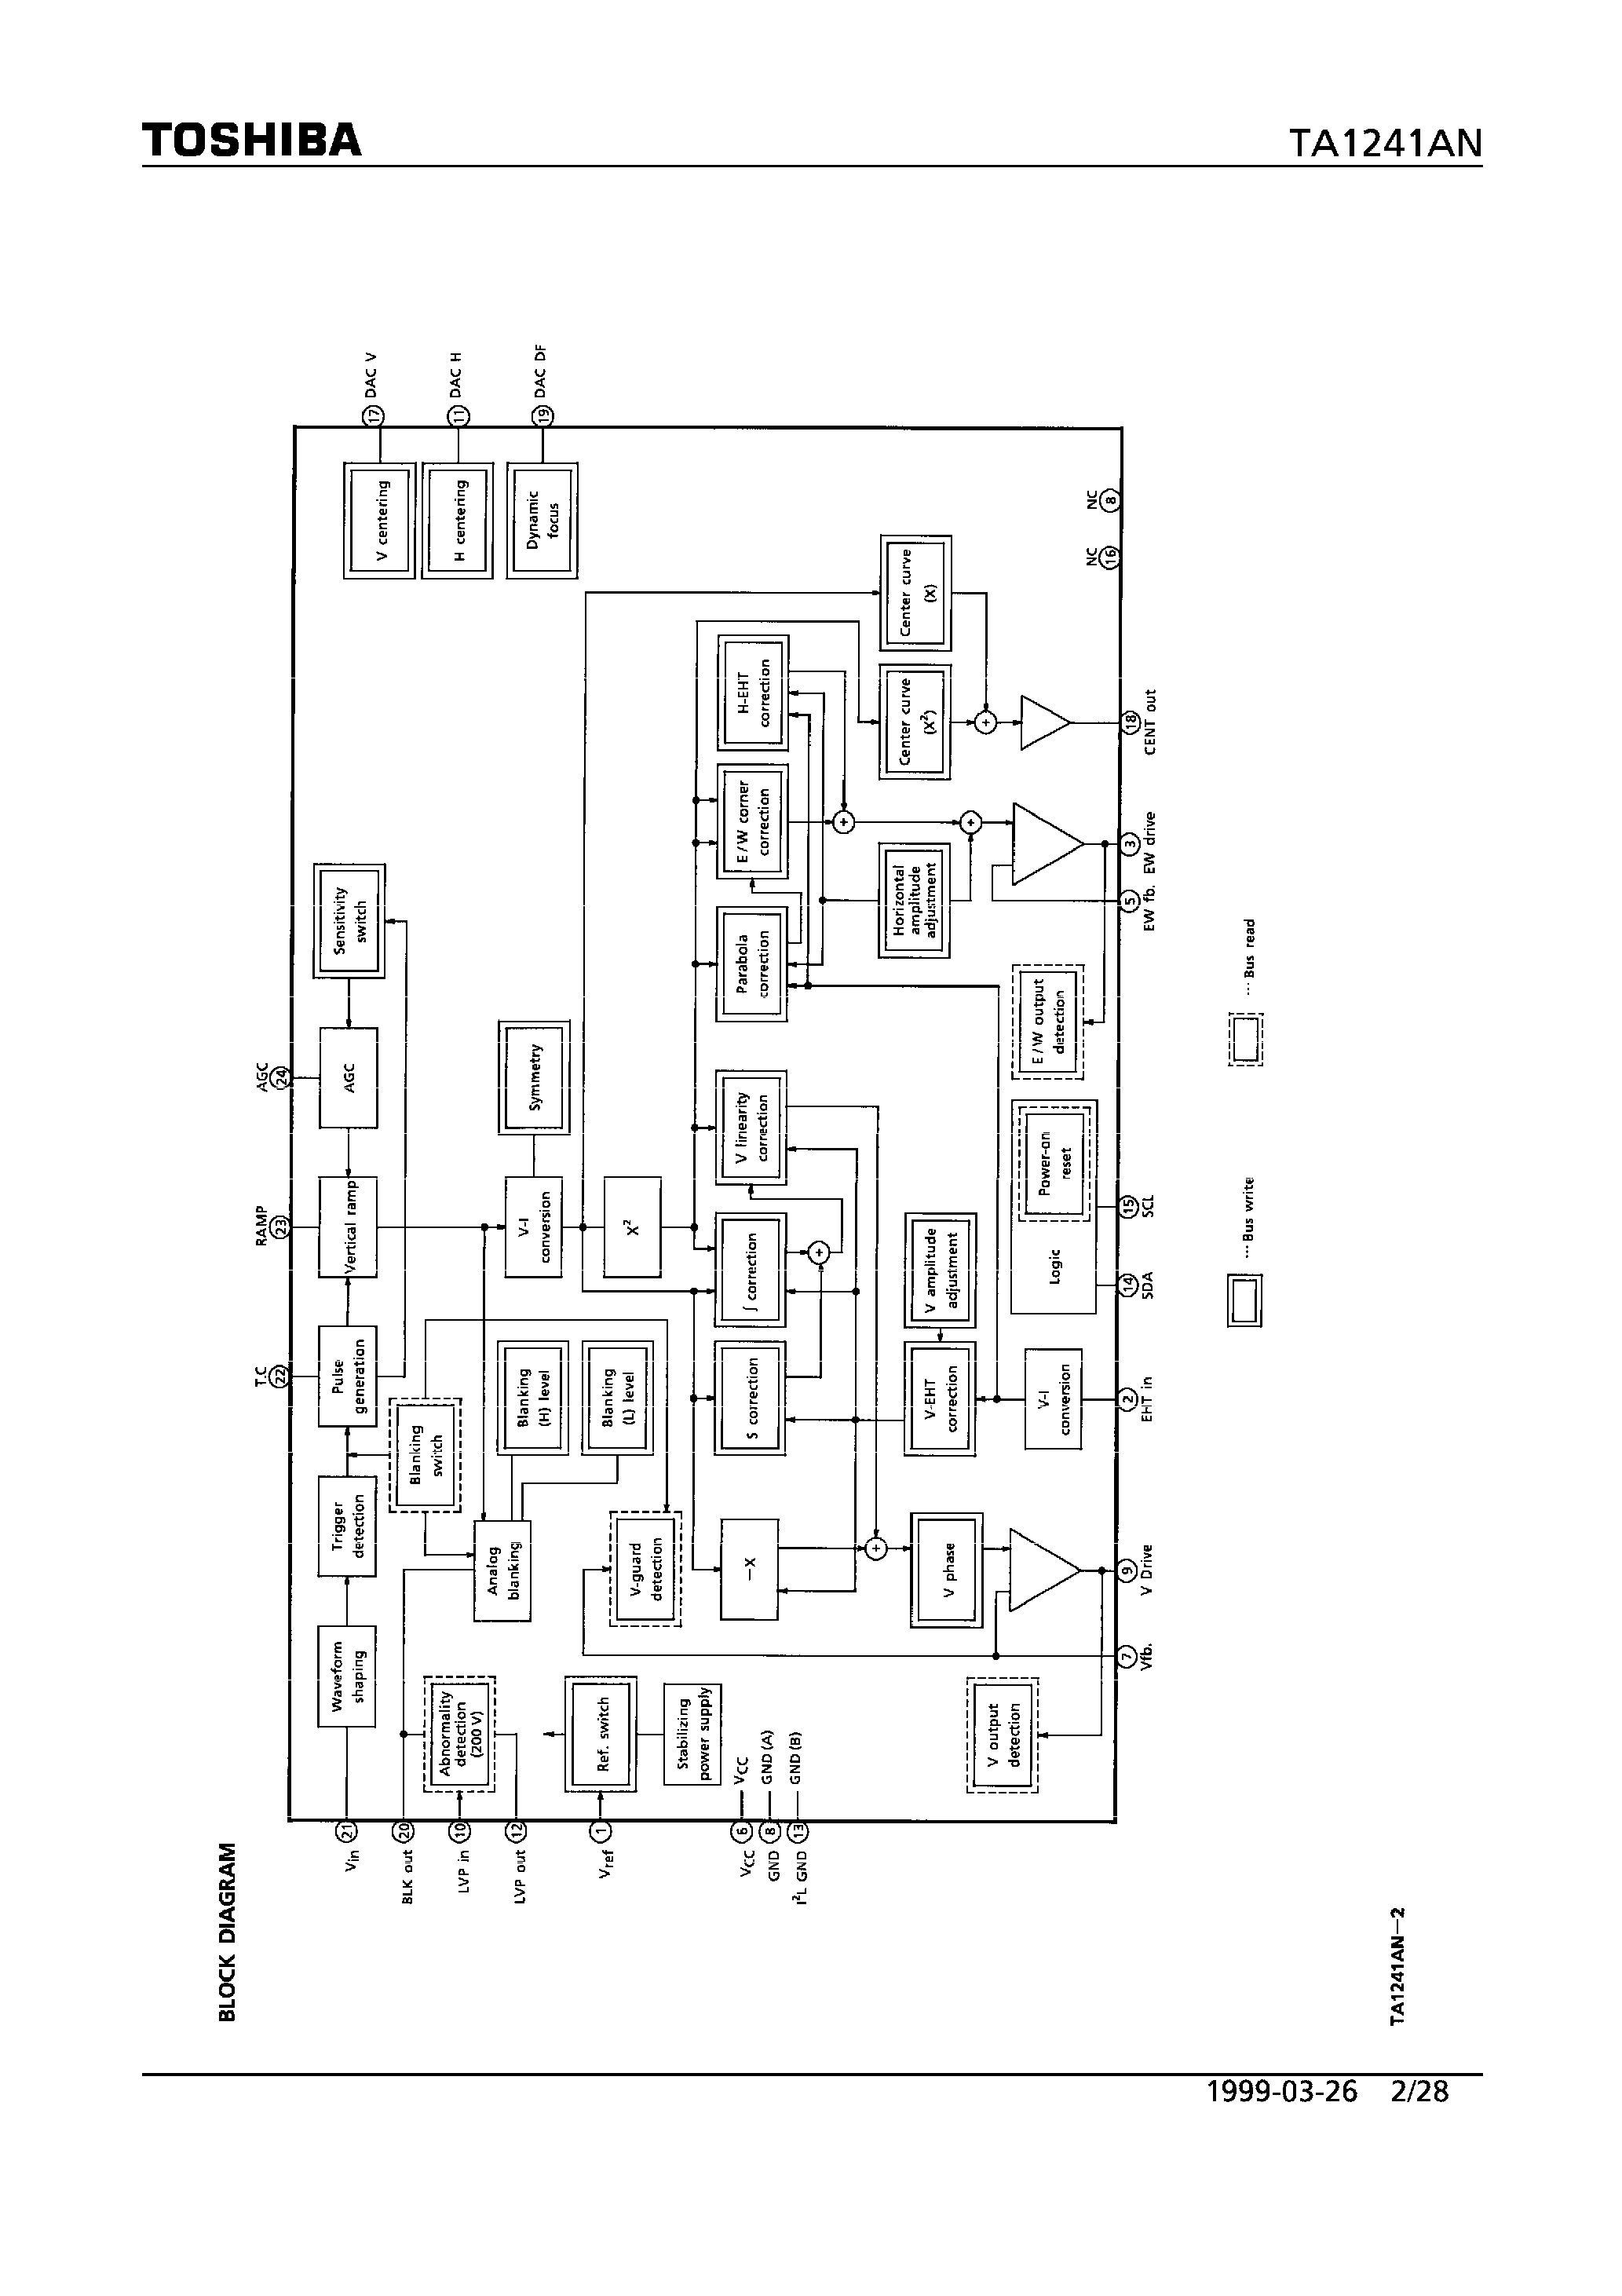 Datasheet TA1241AN - DEFLECTION PROCESSOR IC FOR TVs page 2